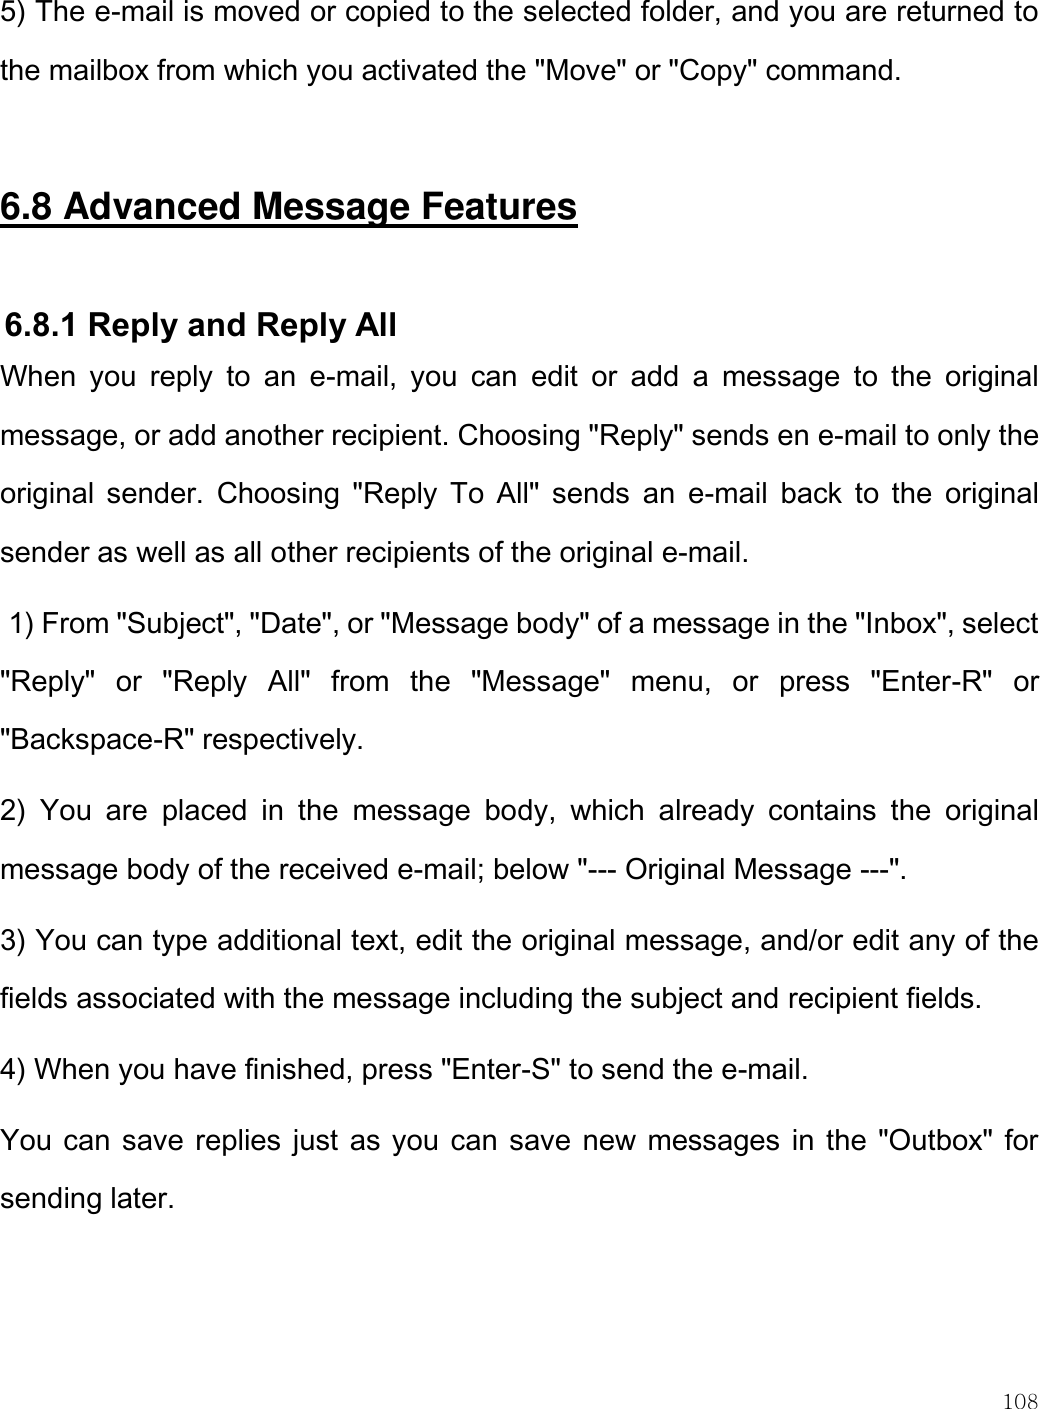    108  5) The e-mail is moved or copied to the selected folder, and you are returned to the mailbox from which you activated the &quot;Move&quot; or &quot;Copy&quot; command.  6.8 Advanced Message Features  6.8.1 Reply and Reply All  When  you  reply  to  an  e-mail,  you  can  edit  or  add  a  message  to  the  original message, or add another recipient. Choosing &quot;Reply&quot; sends en e-mail to only the original  sender.  Choosing  &quot;Reply  To  All&quot;  sends  an  e-mail  back  to  the  original sender as well as all other recipients of the original e-mail.   1) From &quot;Subject&quot;, &quot;Date&quot;, or &quot;Message body&quot; of a message in the &quot;Inbox&quot;, select &quot;Reply&quot;  or  &quot;Reply  All&quot;  from  the  &quot;Message&quot;  menu,  or  press  &quot;Enter-R&quot;  or &quot;Backspace-R&quot; respectively. 2)  You  are  placed  in  the  message  body,  which  already  contains  the  original message body of the received e-mail; below &quot;--- Original Message ---&quot;.  3) You can type additional text, edit the original message, and/or edit any of the fields associated with the message including the subject and recipient fields. 4) When you have finished, press &quot;Enter-S&quot; to send the e-mail. You can save replies just as you can save new messages in the &quot;Outbox&quot; for sending later.  